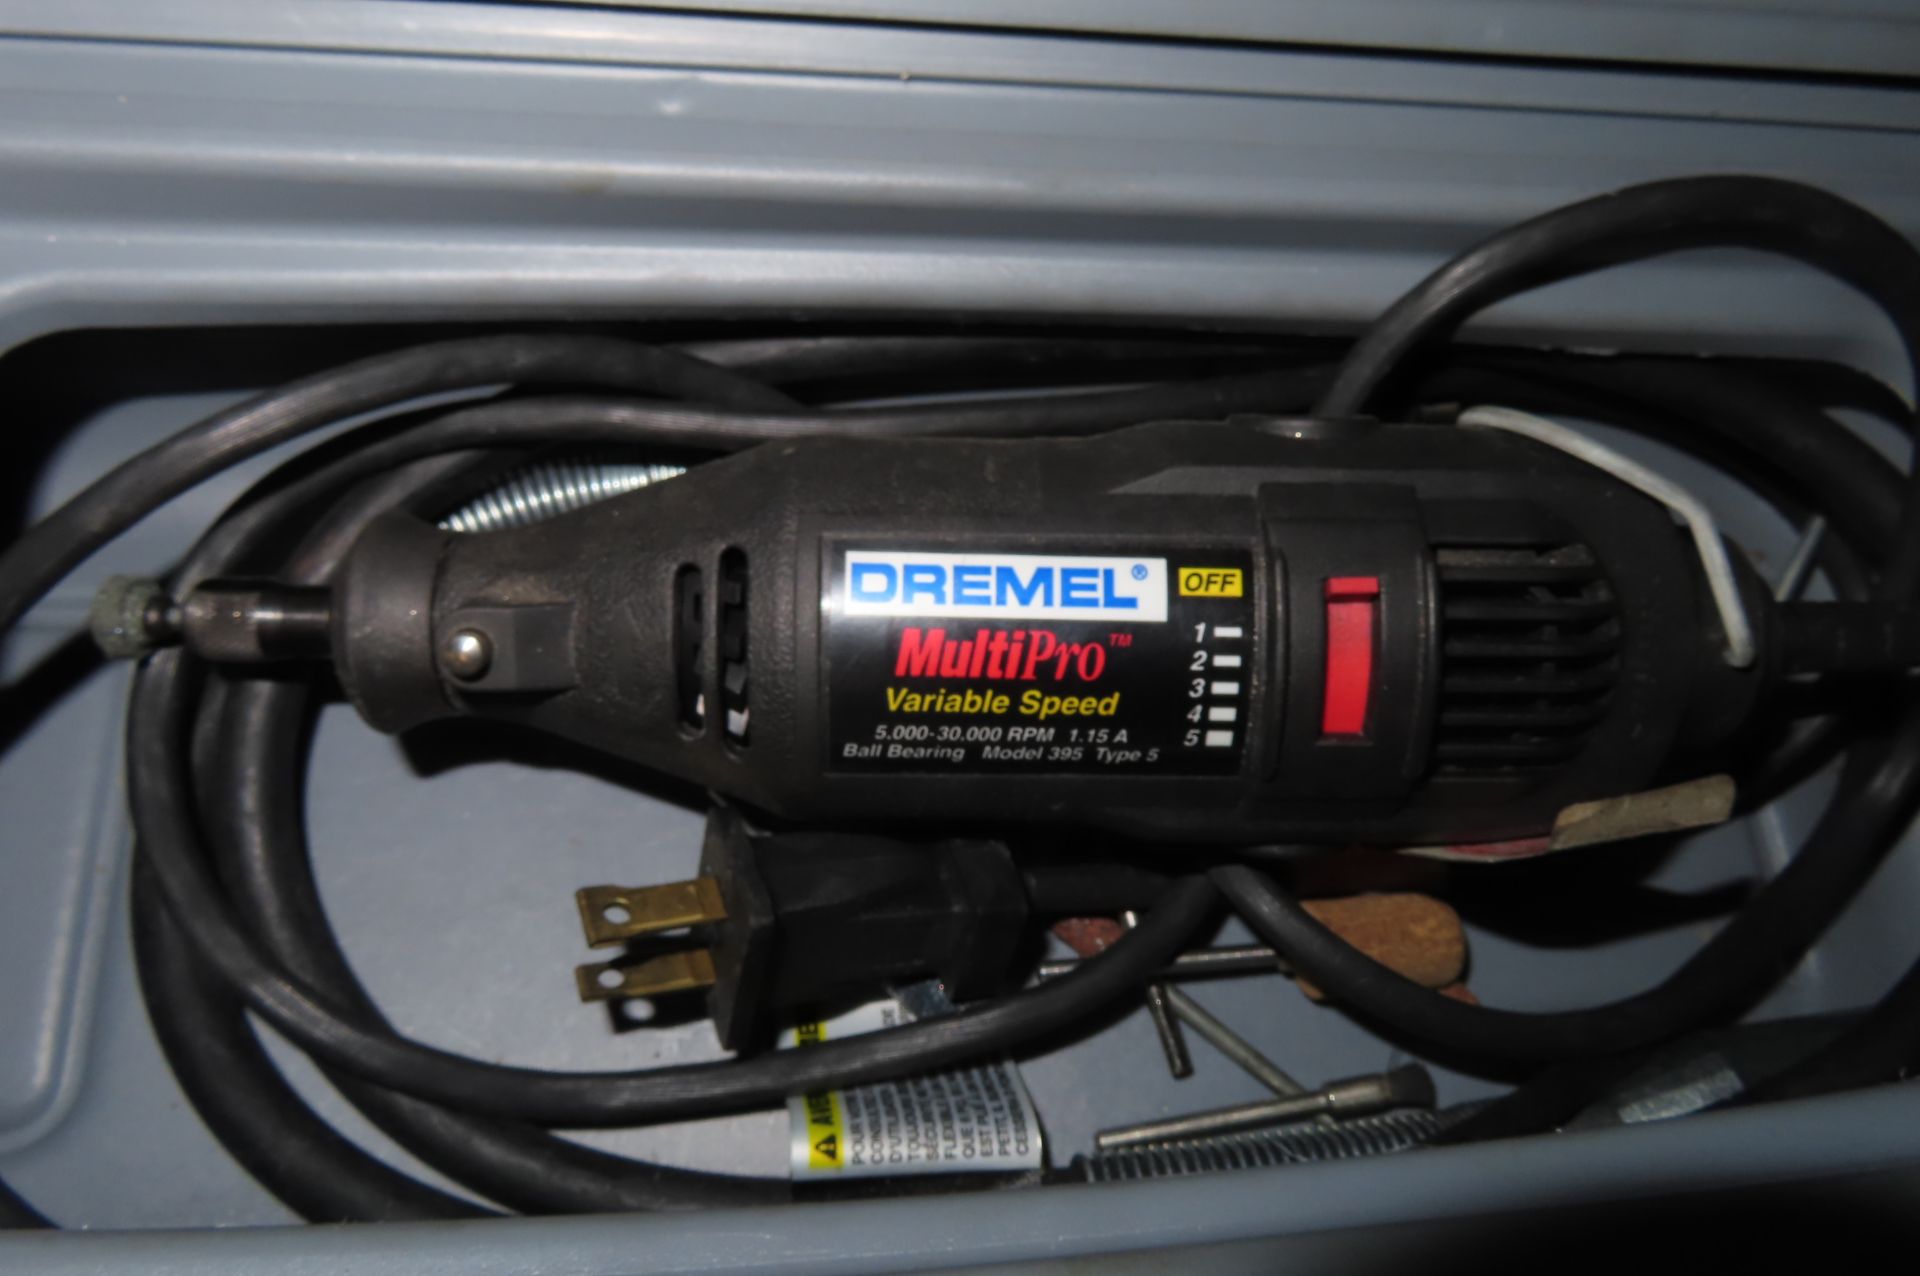 DREMEL MULTIPRO VARIABLE SPEED MDL 395 TOOL WITH 225T2 FLEX SHAFT AND ASSORTED ACCESSORIES - Image 2 of 4